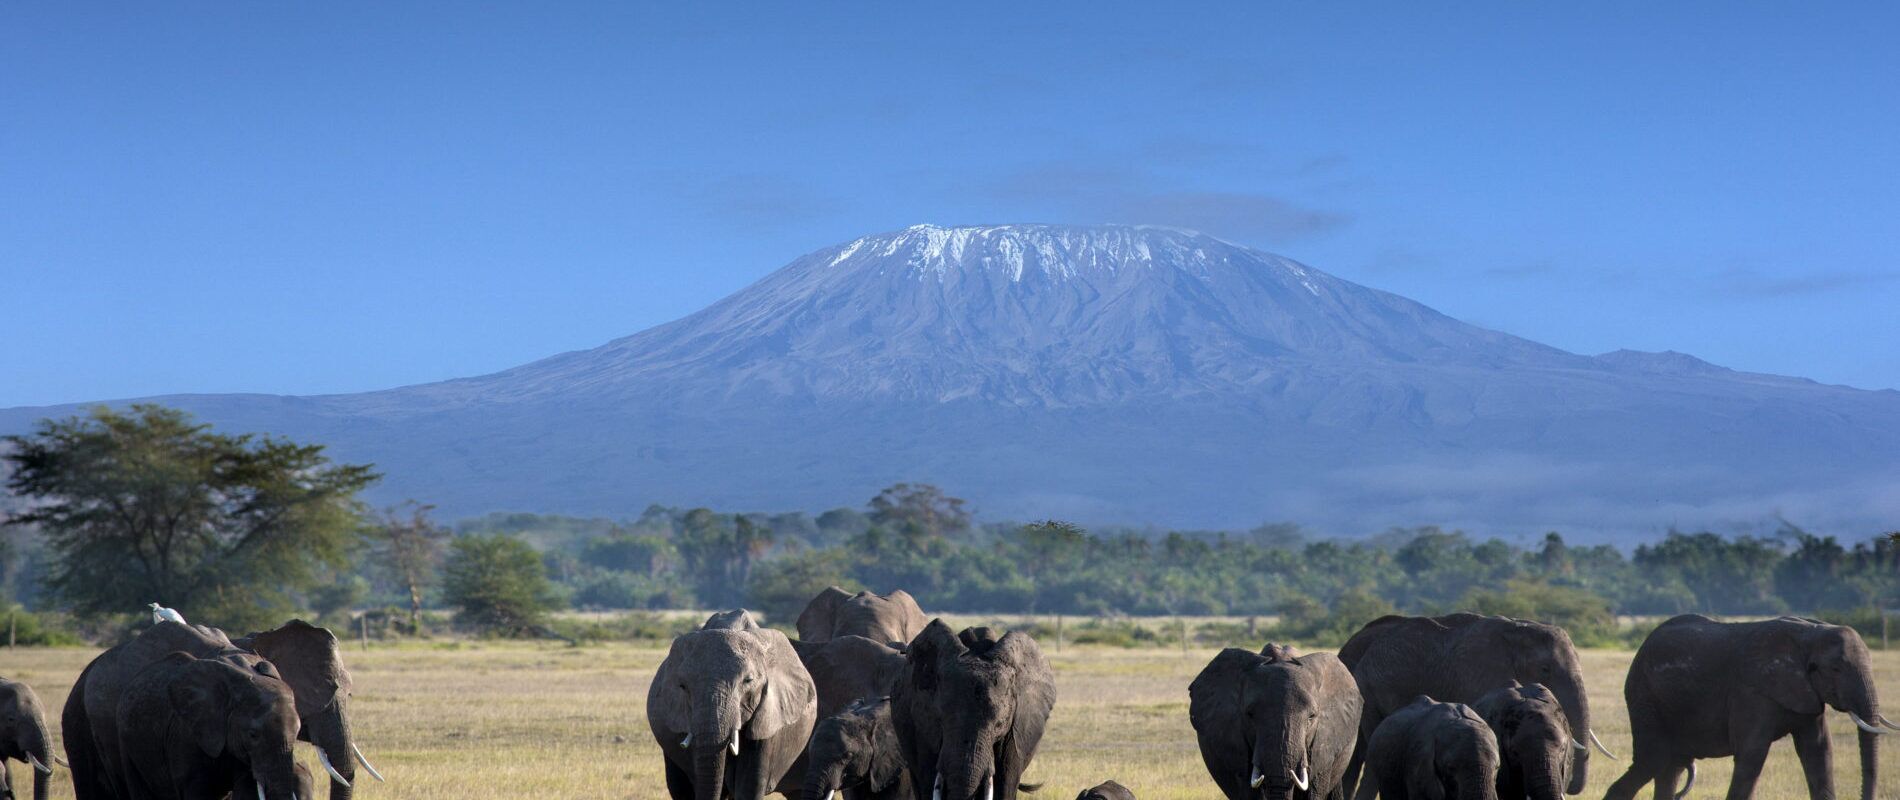 A herd of elephants in Tanzania with Mount Kilimanjaro in the background